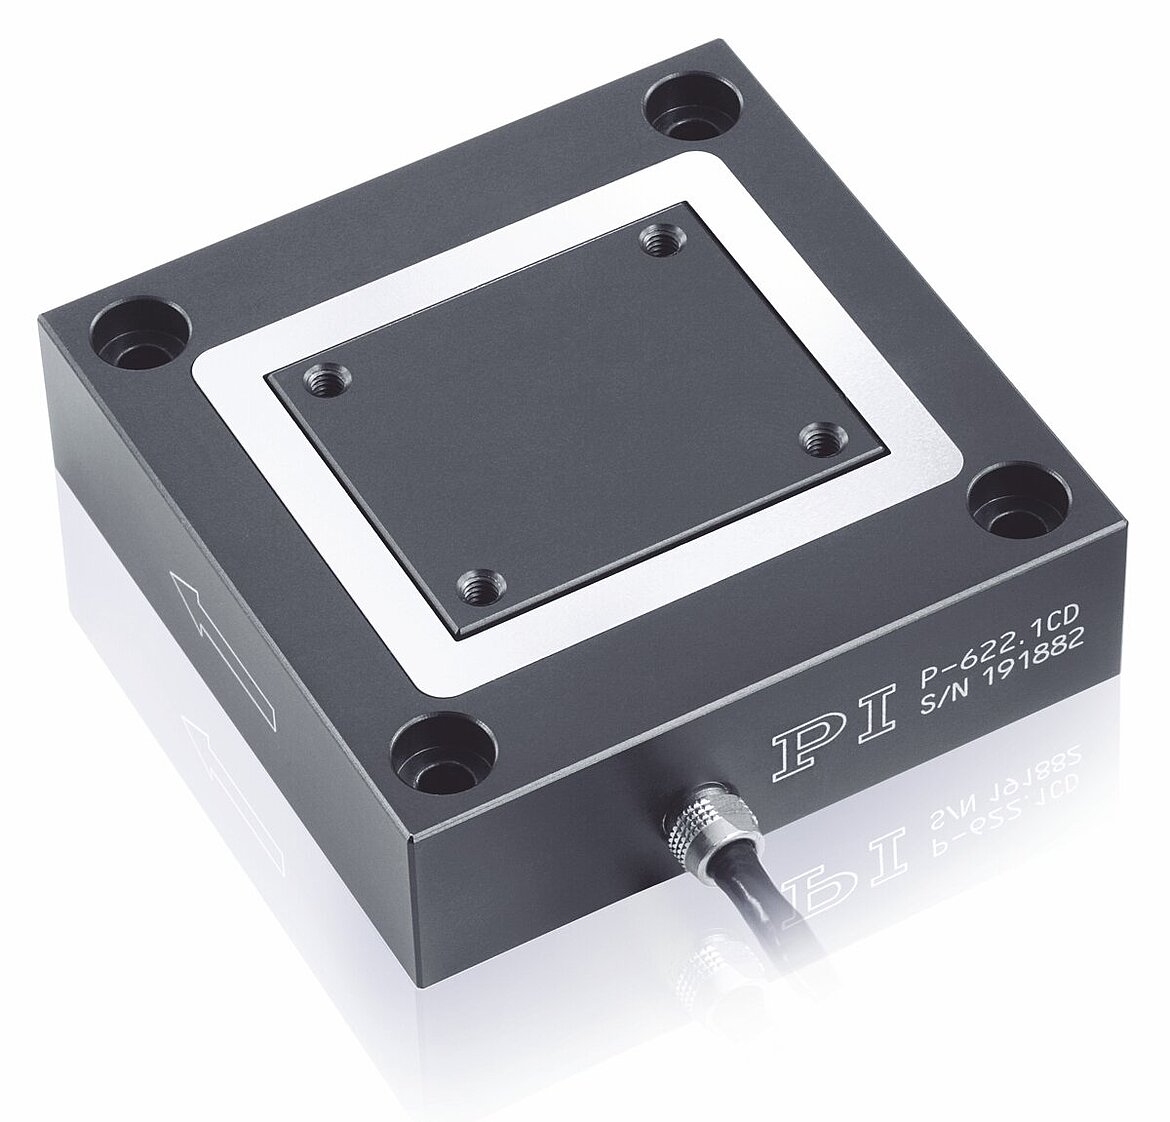 Positioning system based on piezoelectric actuators with a travel range of up to 250 µm and a repeatability of around 1 nm.